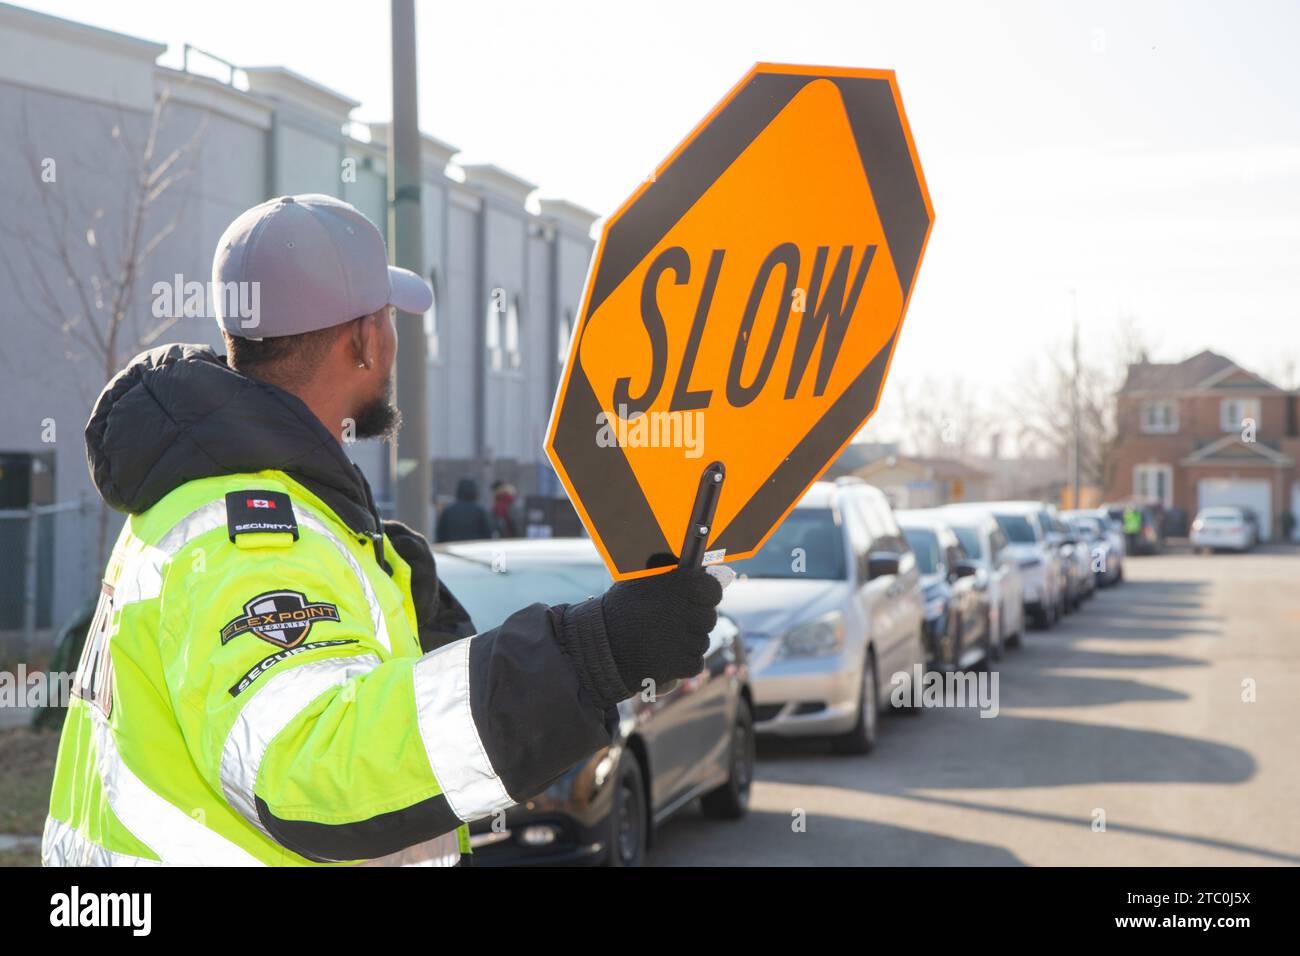 Security guard conducting access control and traffic control around a community building. Stock Photo